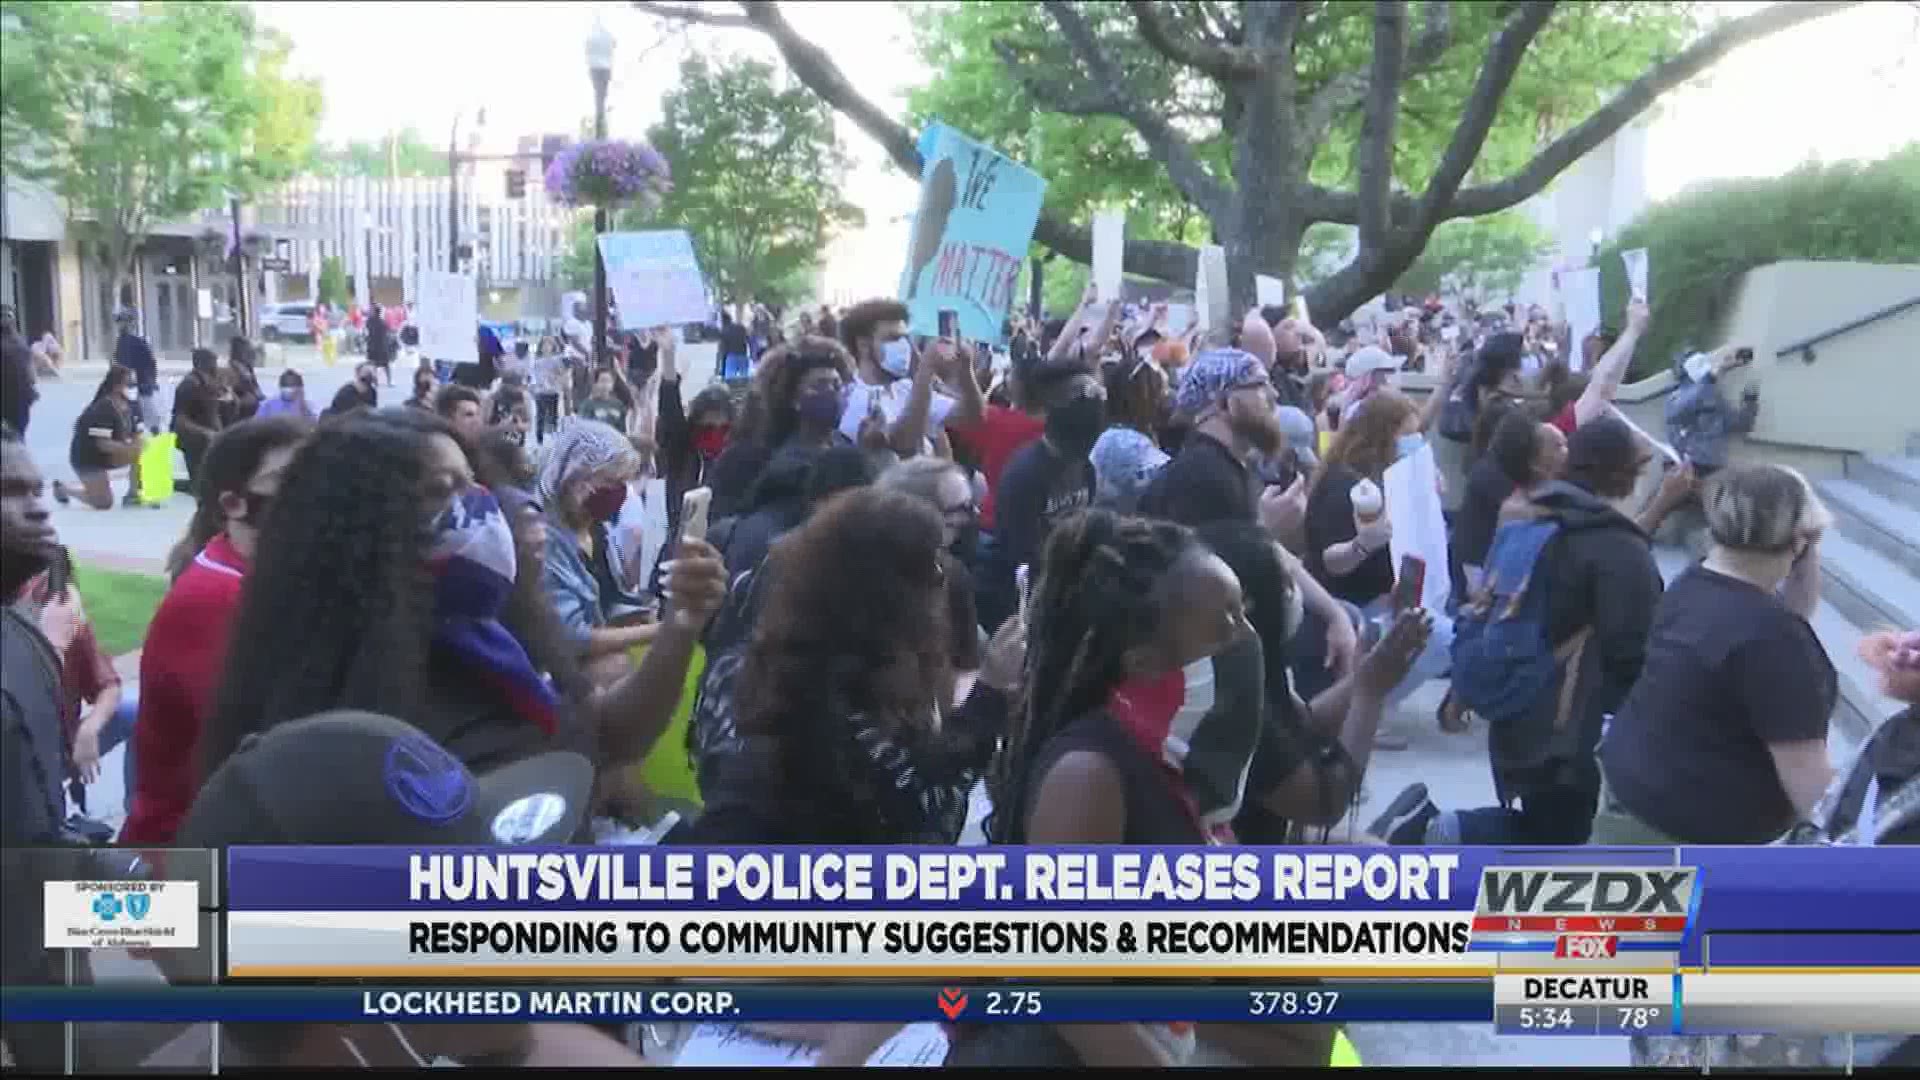 Huntsville police release report in response to community suggestions and recommendations after recent protests in the city.